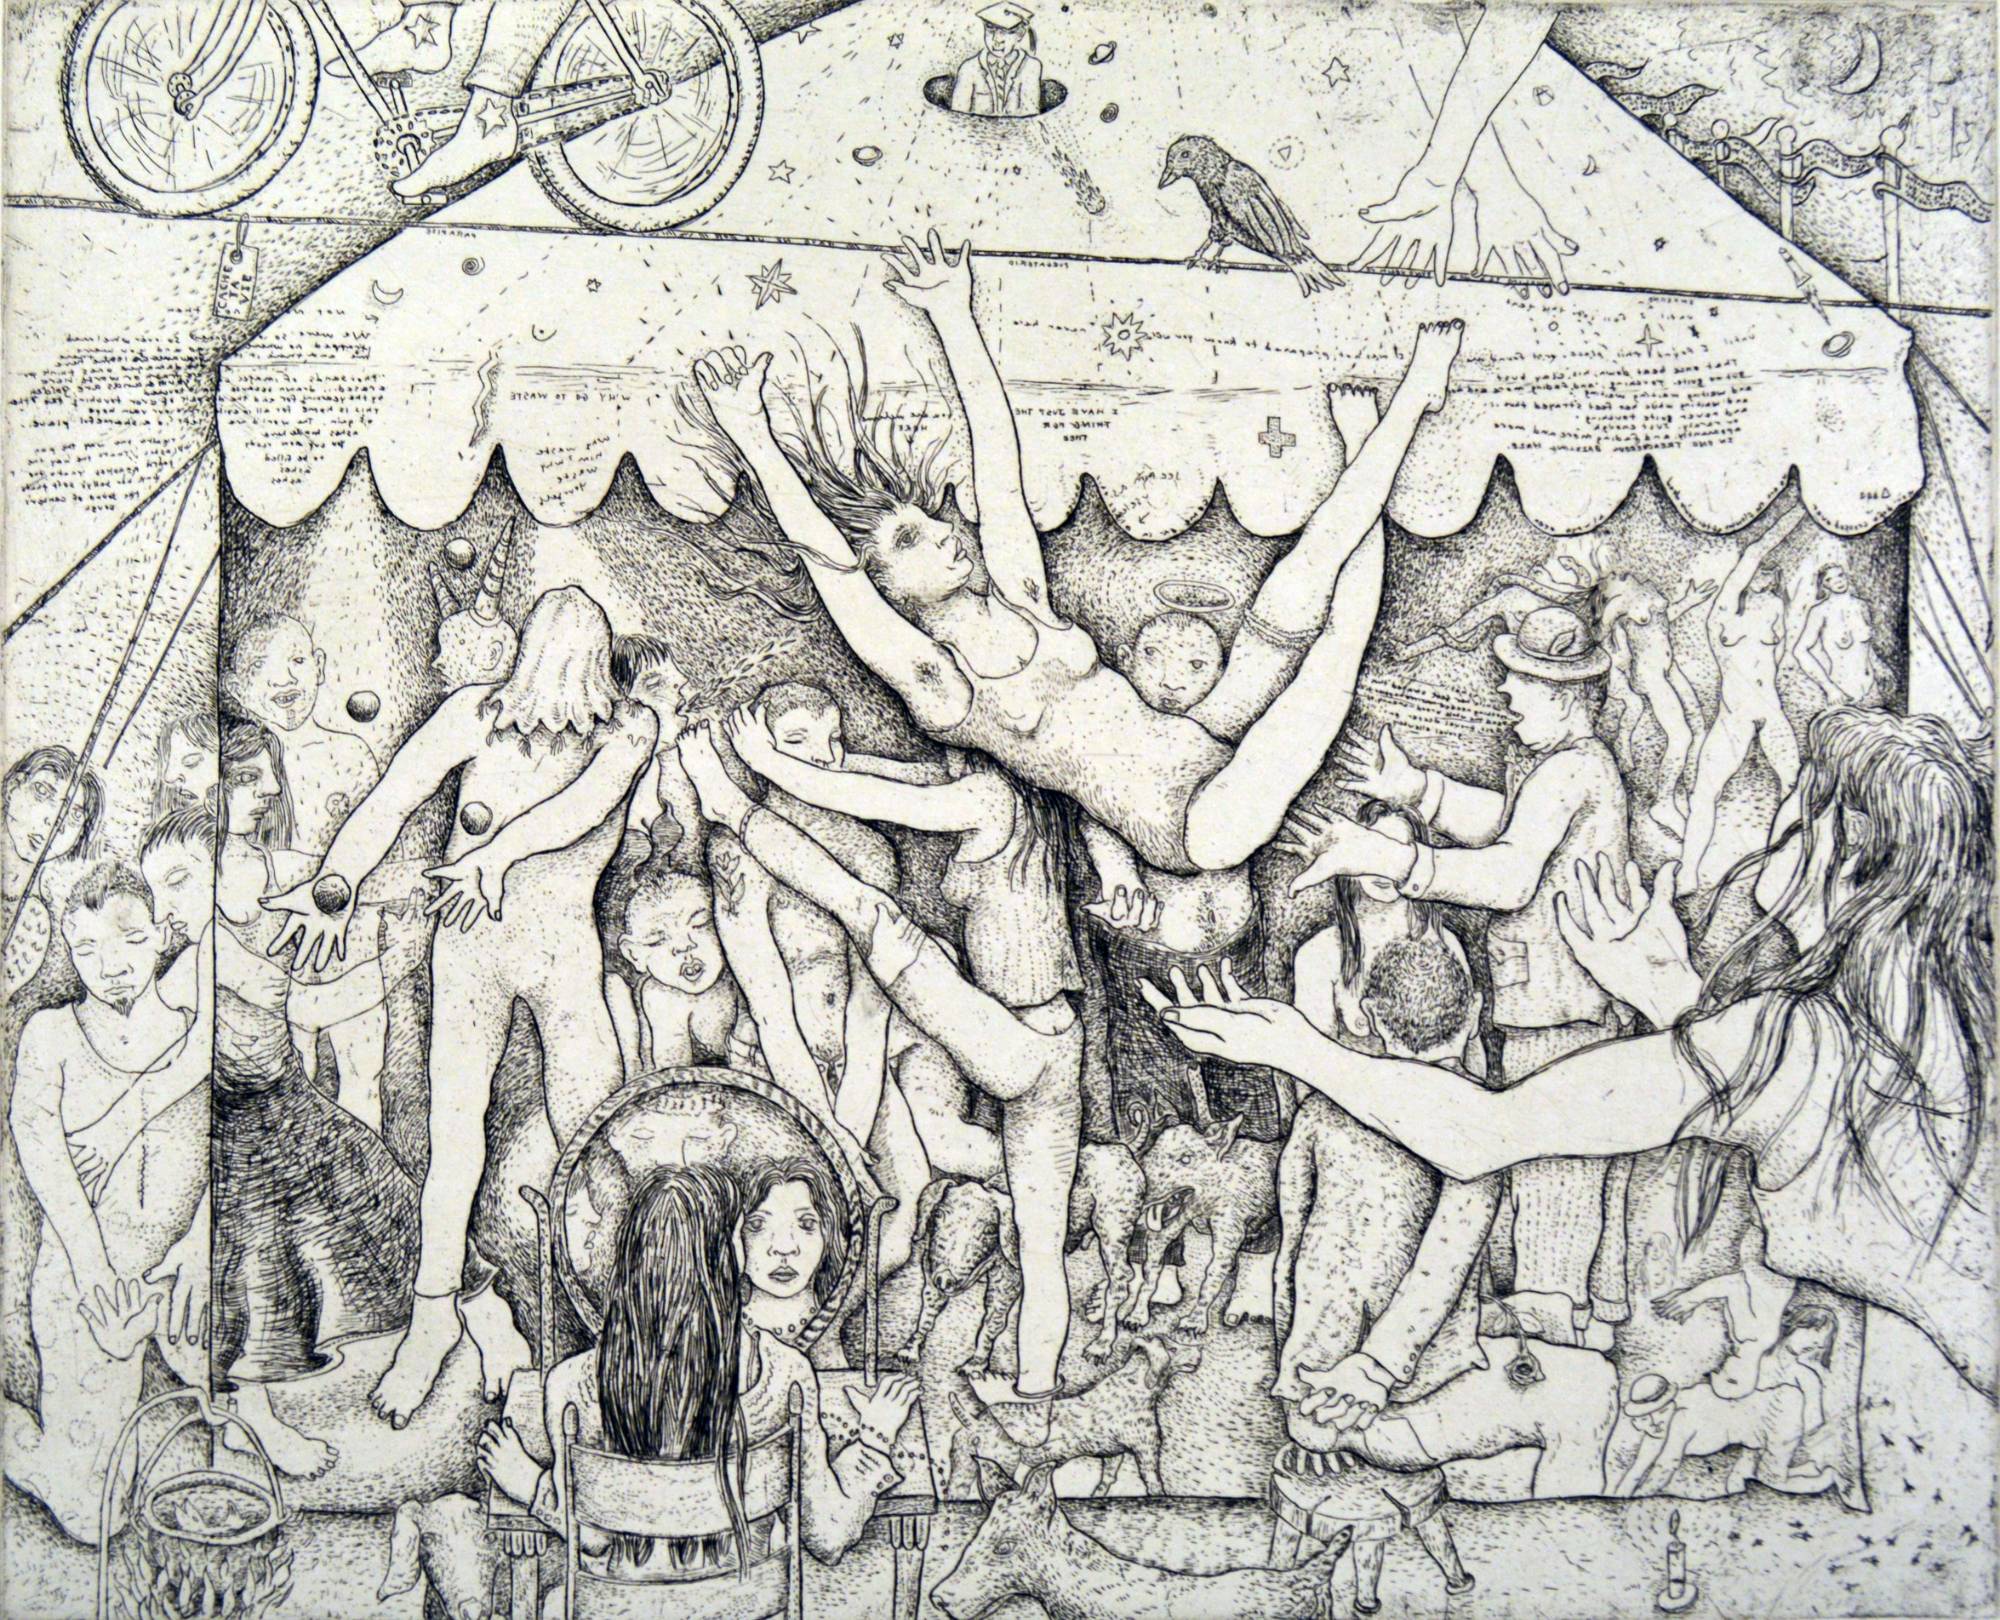 engraving of group of people performing under circus tent